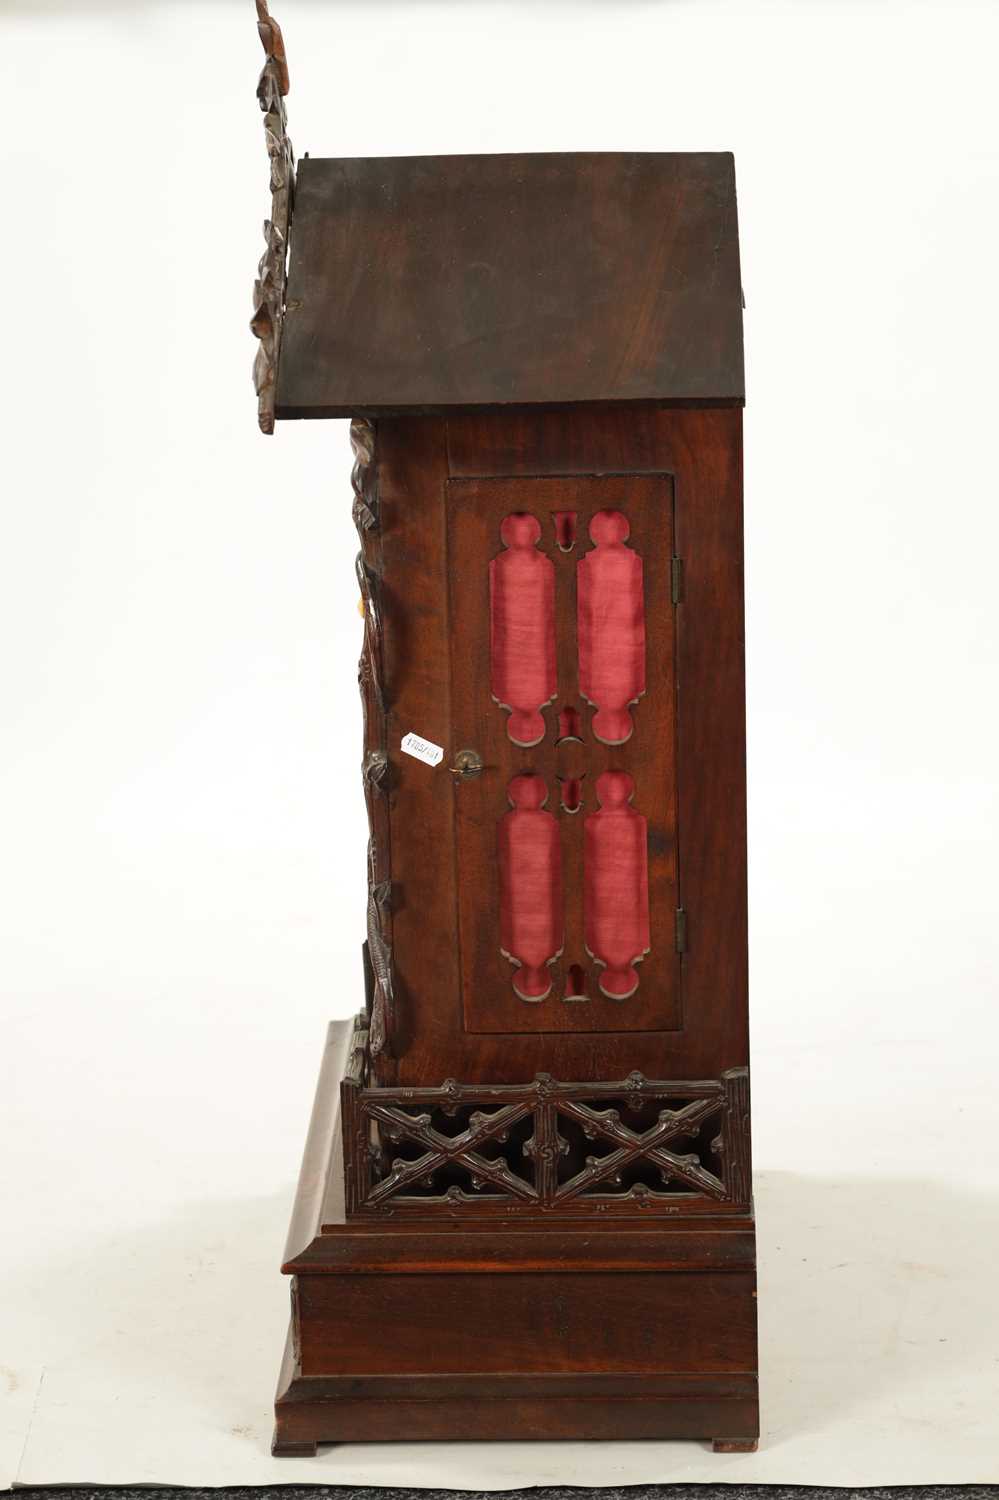 A LARGE LATE 19TH CENTURY BLACK FOREST TRUMPETER CLOCK - Image 5 of 11